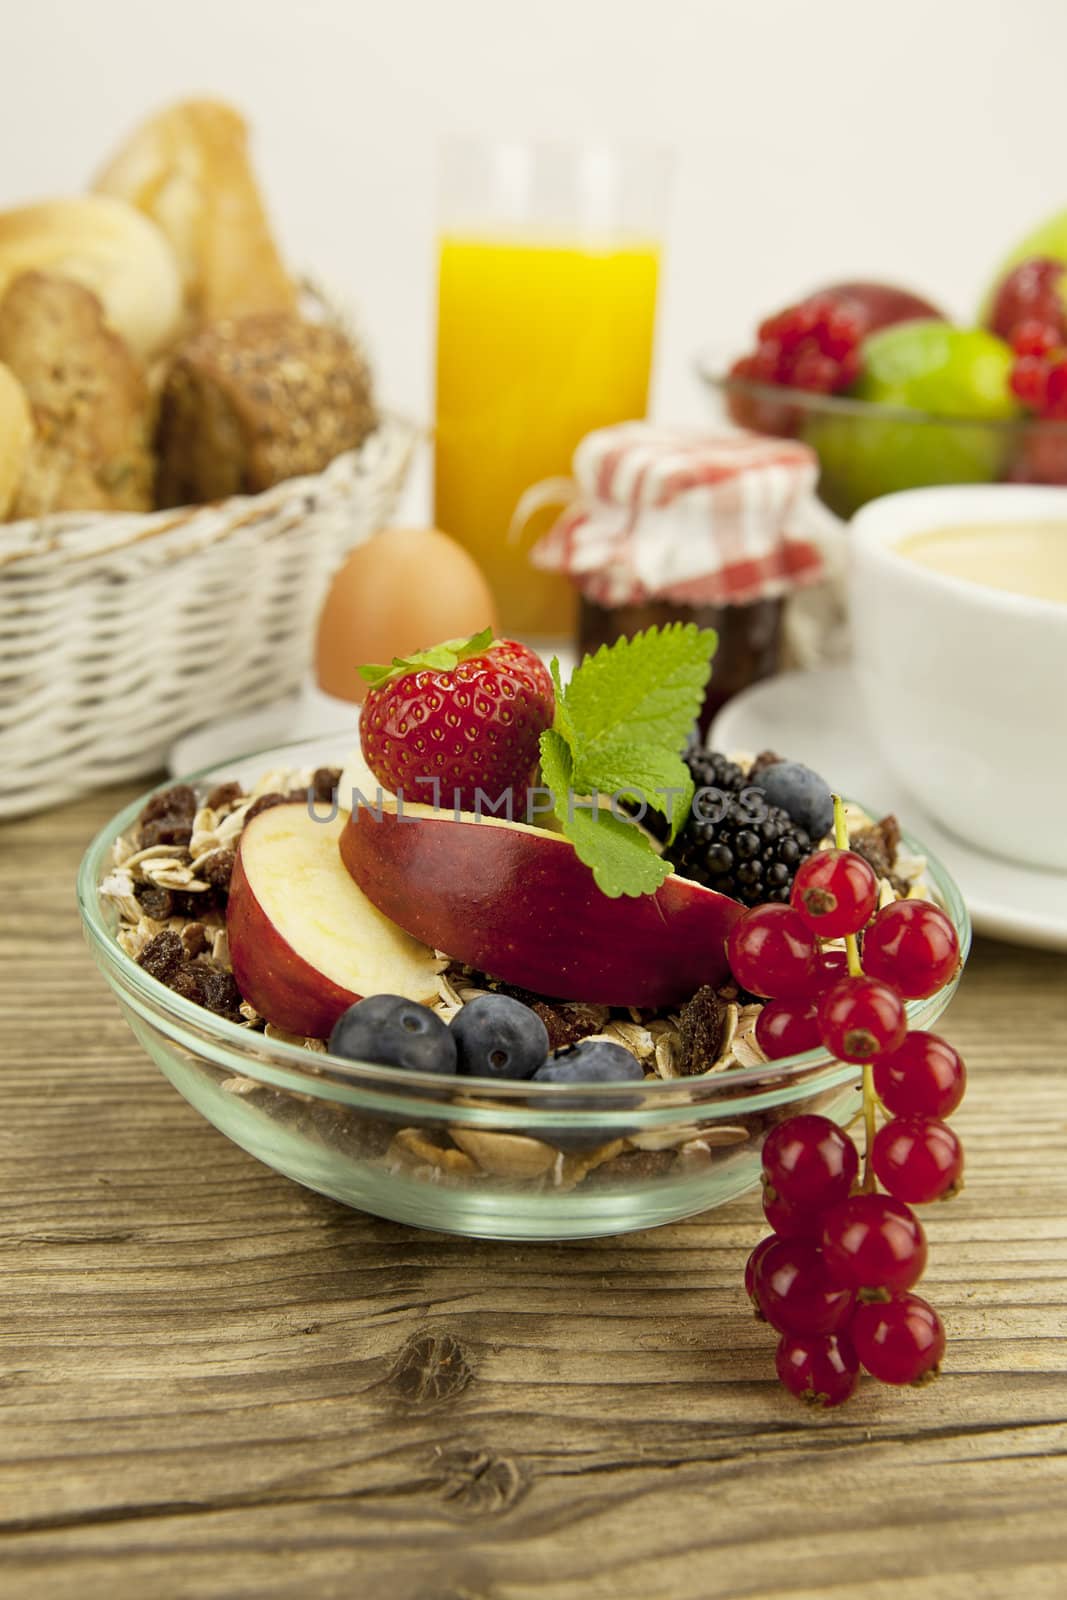 healthx breakfast with flakes and fruits in morning on wooden table